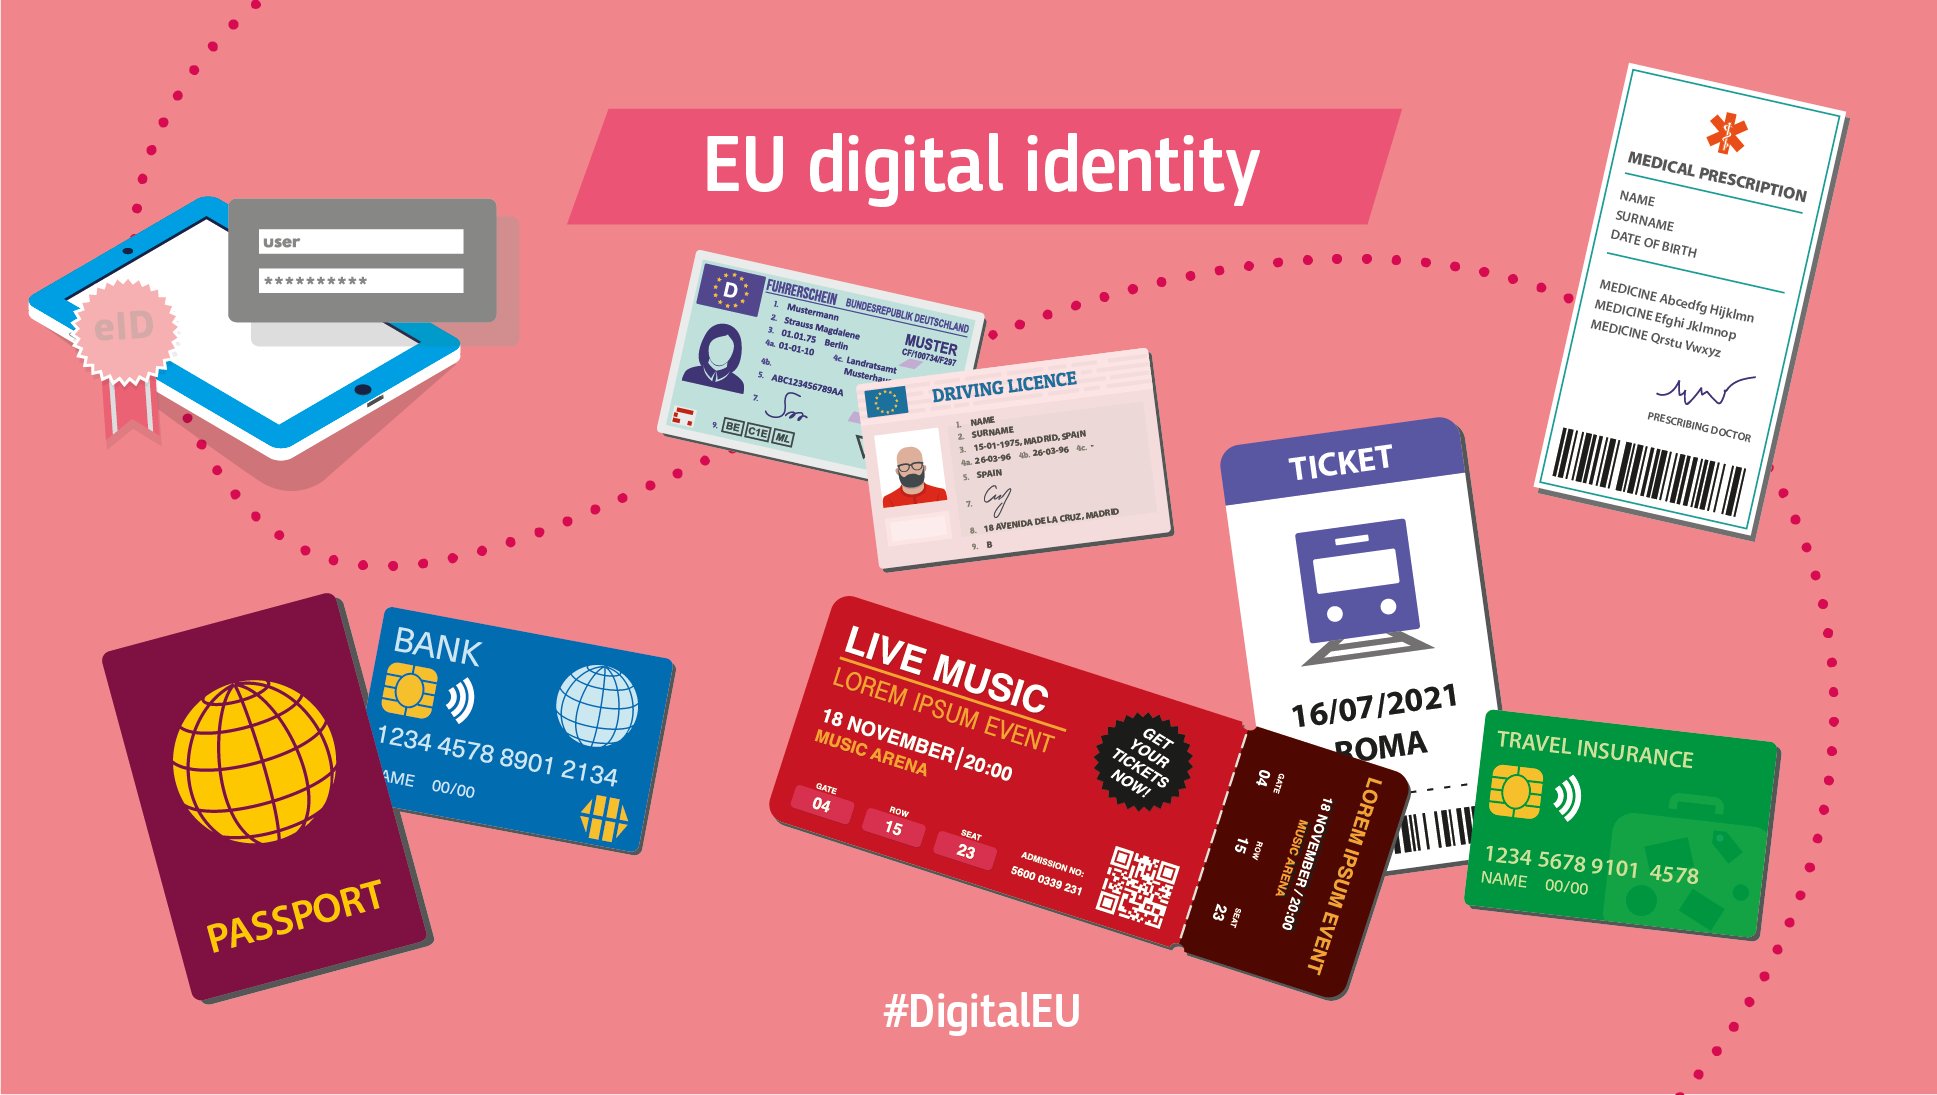 EGBA in favor of new European e-ID proposal – Gaming And Media